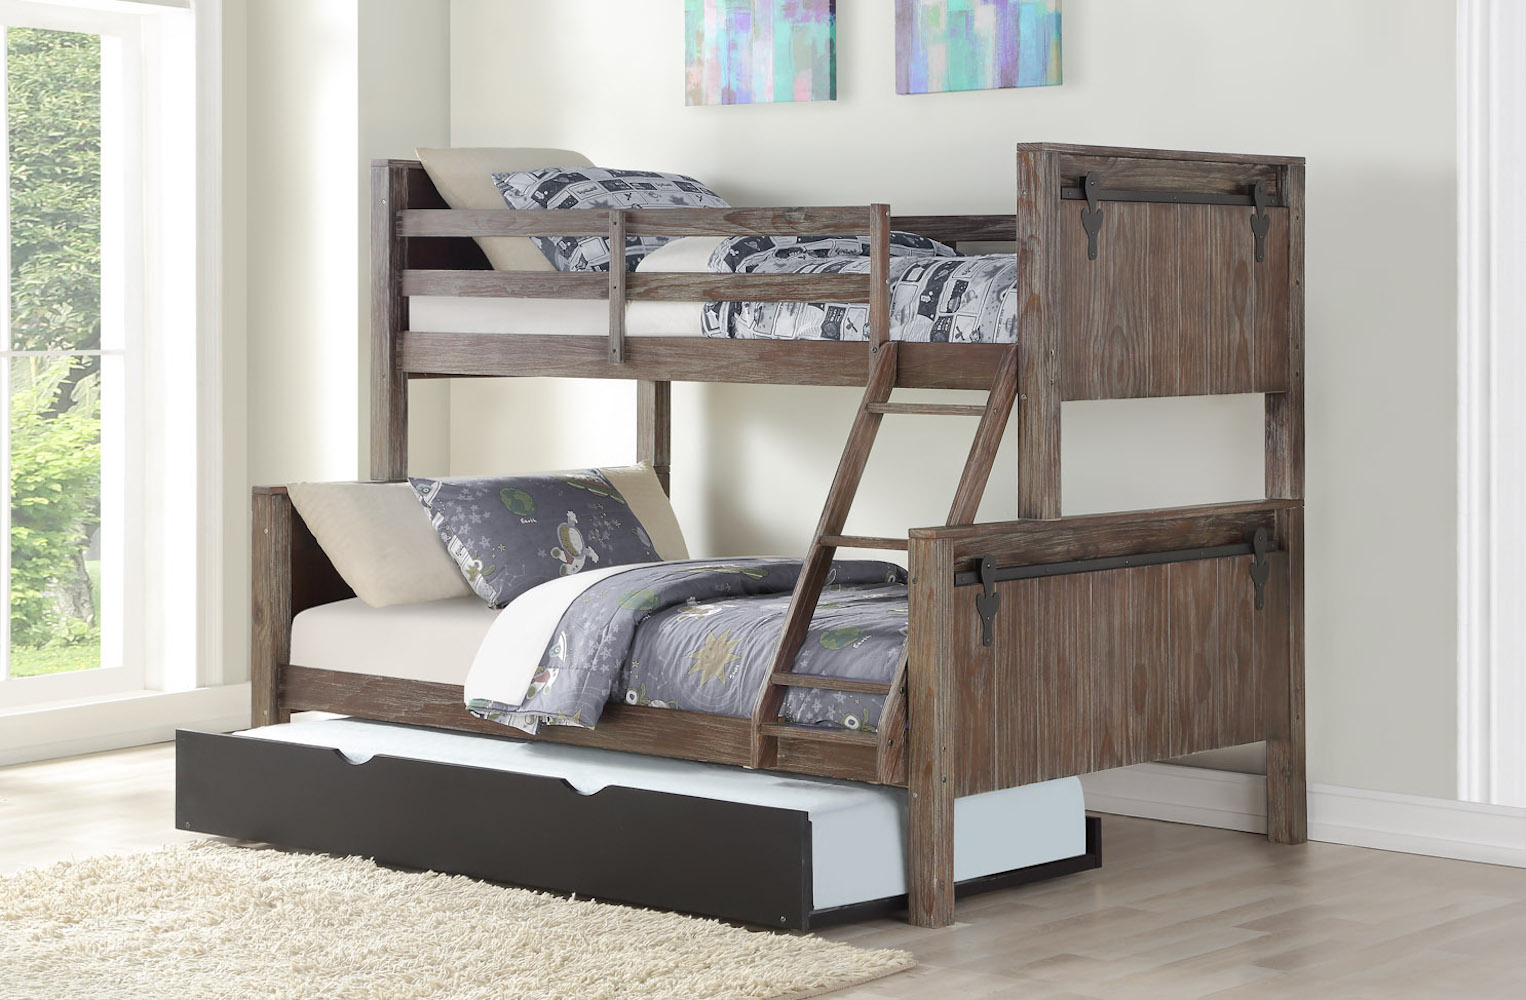 Donco Kids Furniture Twin Bunkbed Trundle Bed